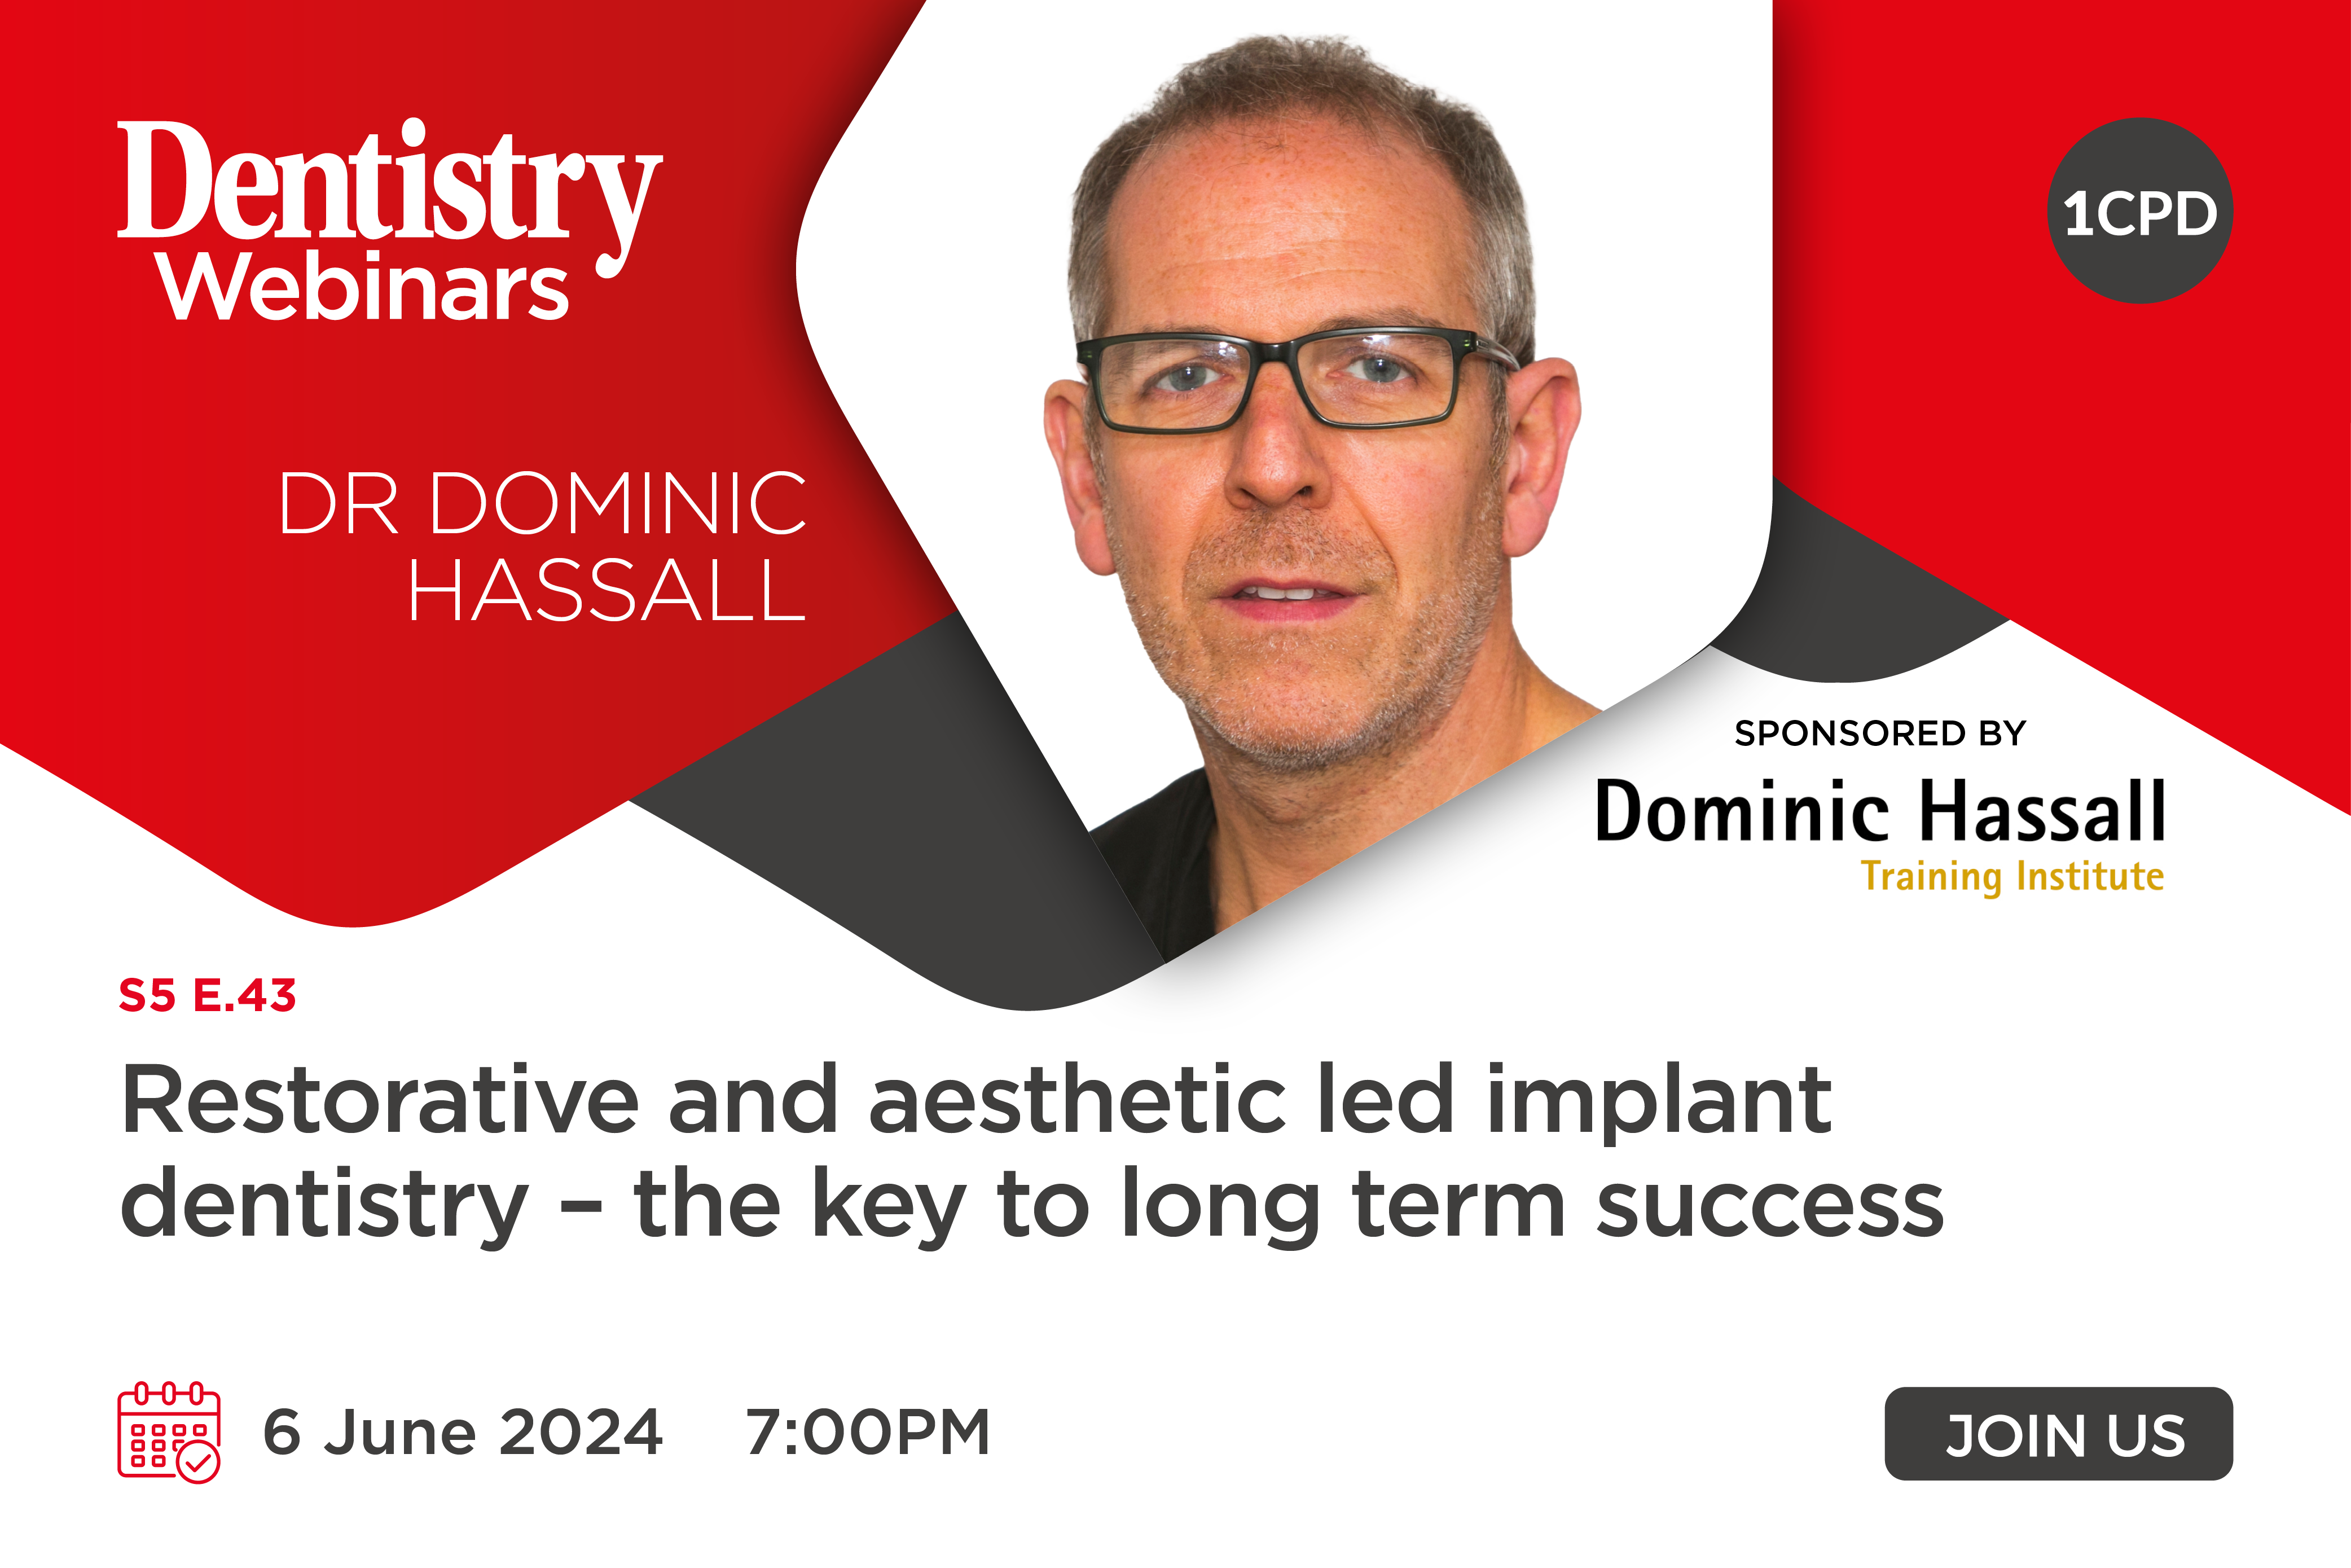 Join Dominic Hassall next Thursday 6 June at 7pm as he discusses restorative and aesthetic led implant dentistry – the key to long term success.